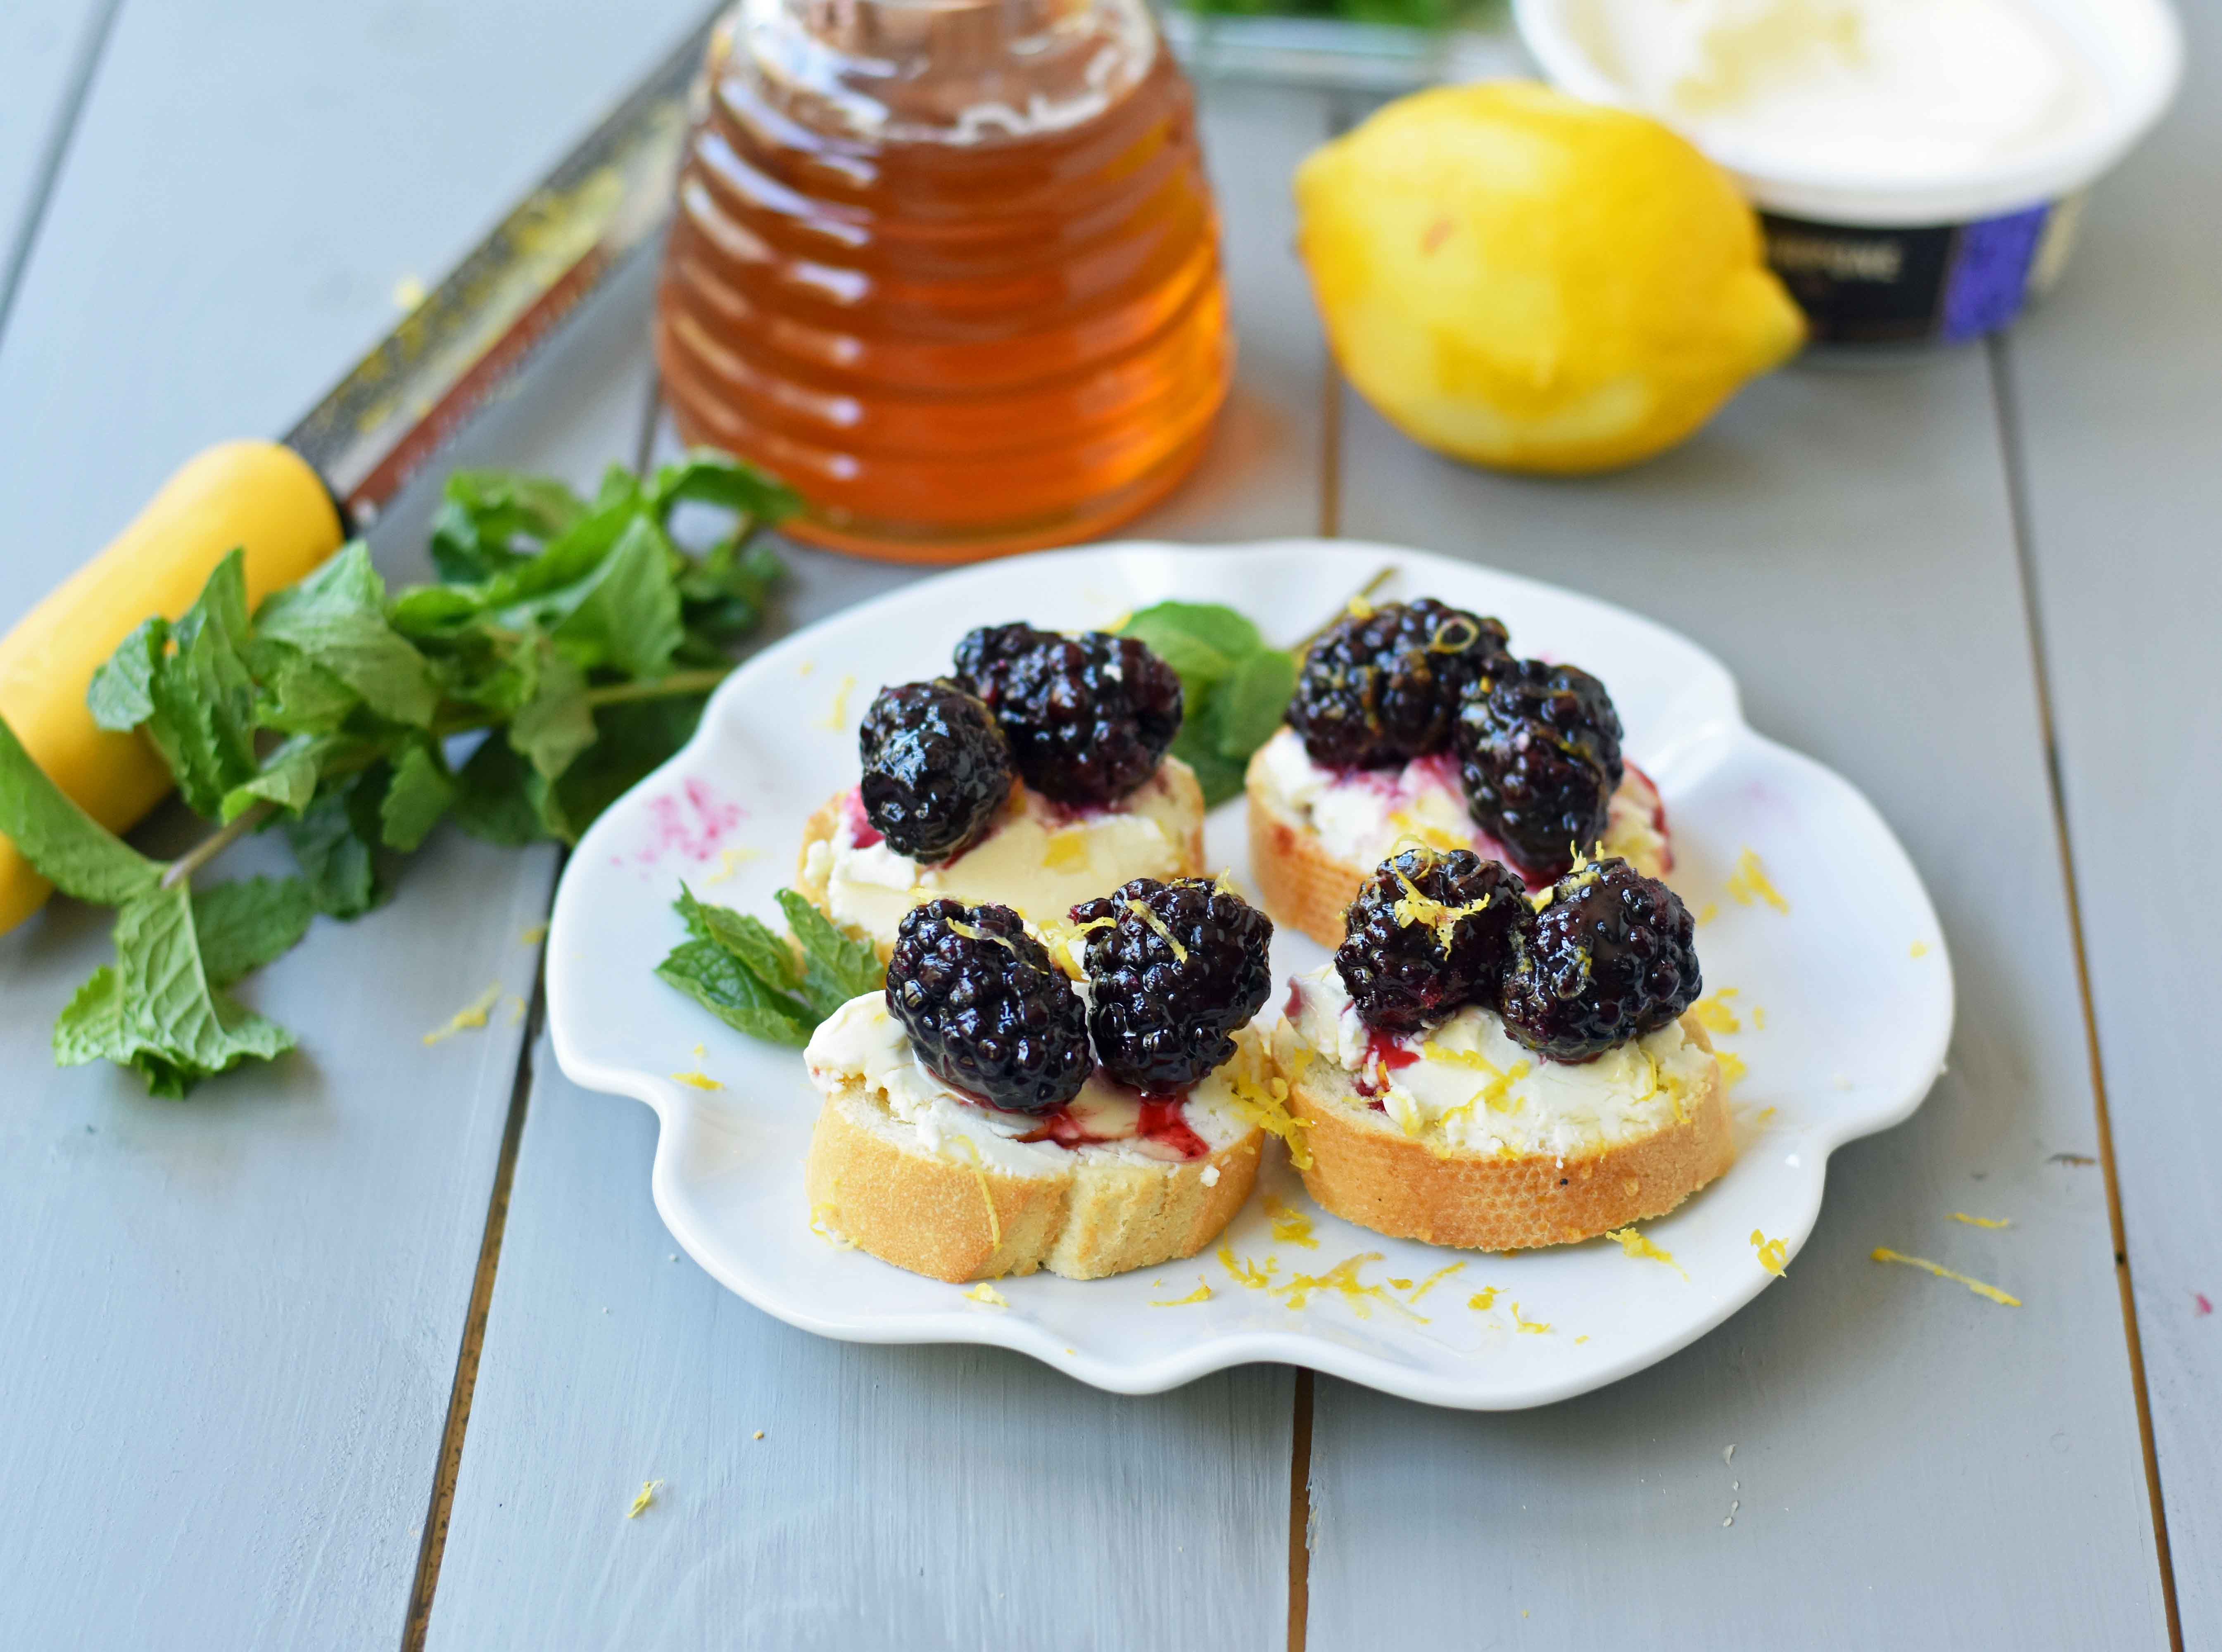 Blackberry and Lemon Mascarpone Crostini. A beautiful appetizer for a bridal shower, baby shower, party, festive holiday party, social gathering or for a dinner at home. A toasted baguette covered in creamy mascarpone cheese and topped with sugar marinated blackberries, fresh lemon zest, and a drizzle of honey. A sophisticated yet delicious appetizer. www.modernhoney.com